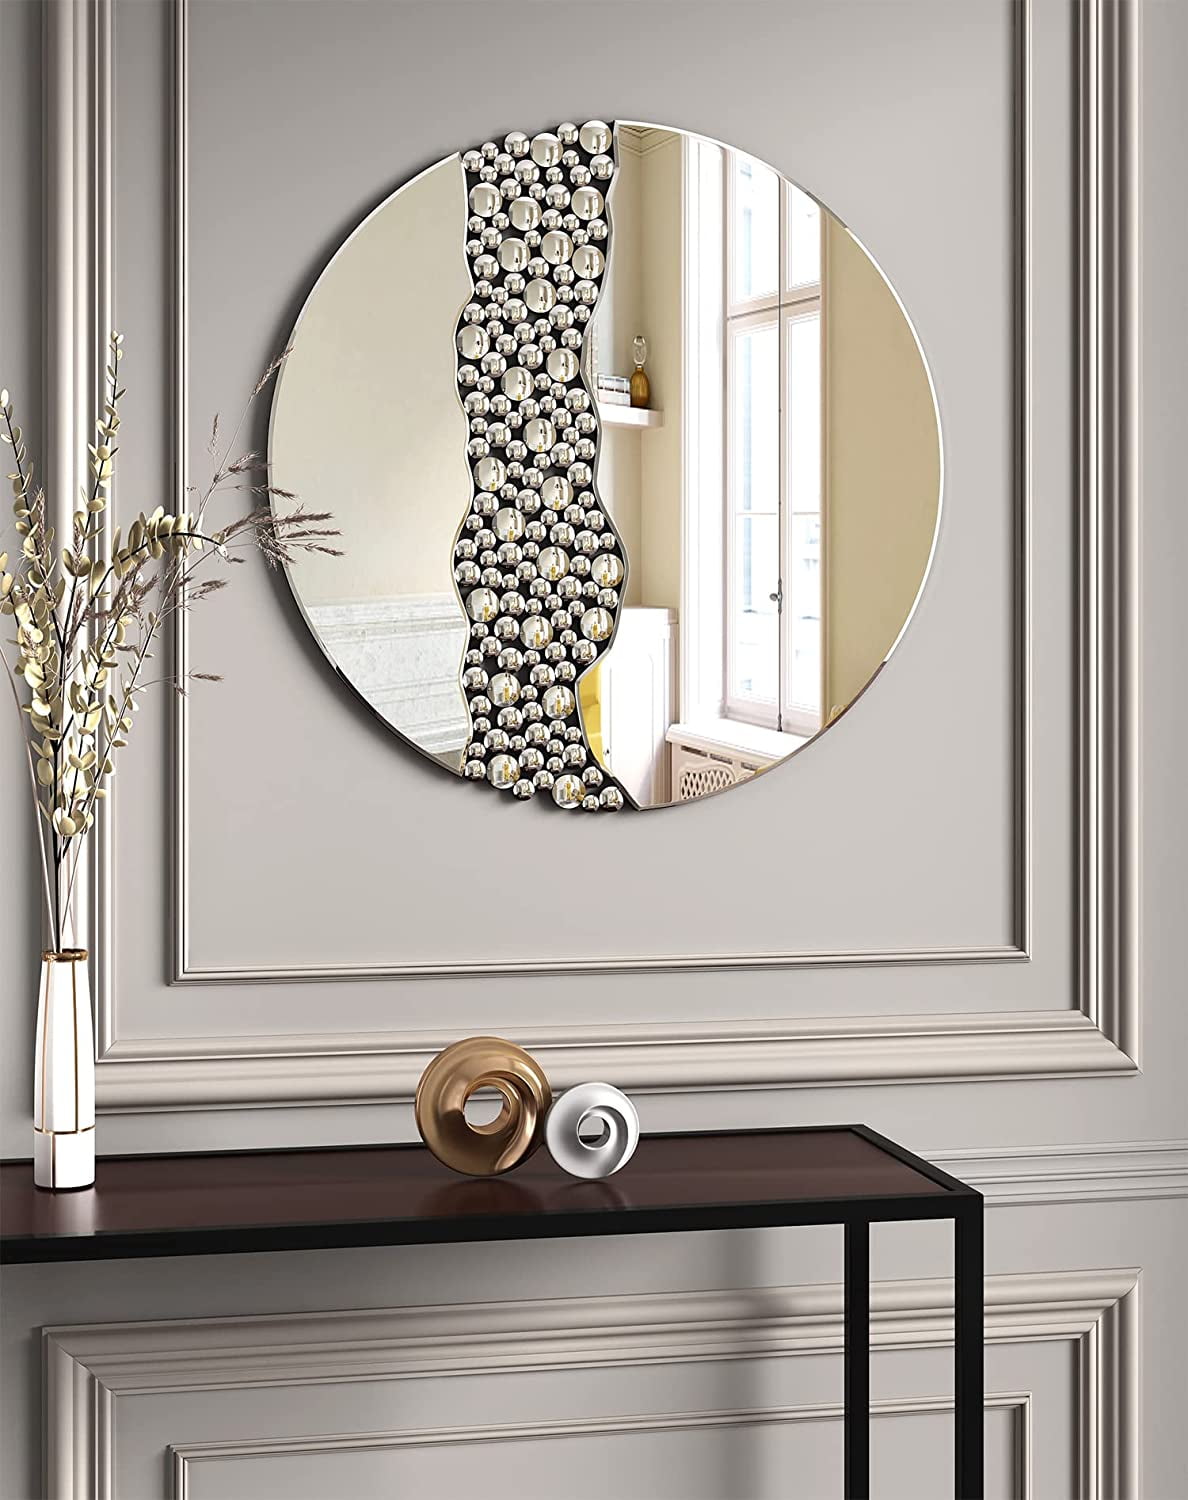 Buy Wholesale China Round Frameless Wall Mirrors Wholesale Modern Cheap  Small Round Mirror Metal Wall Decorative Mirror & Wall Mirrors at USD 3.89